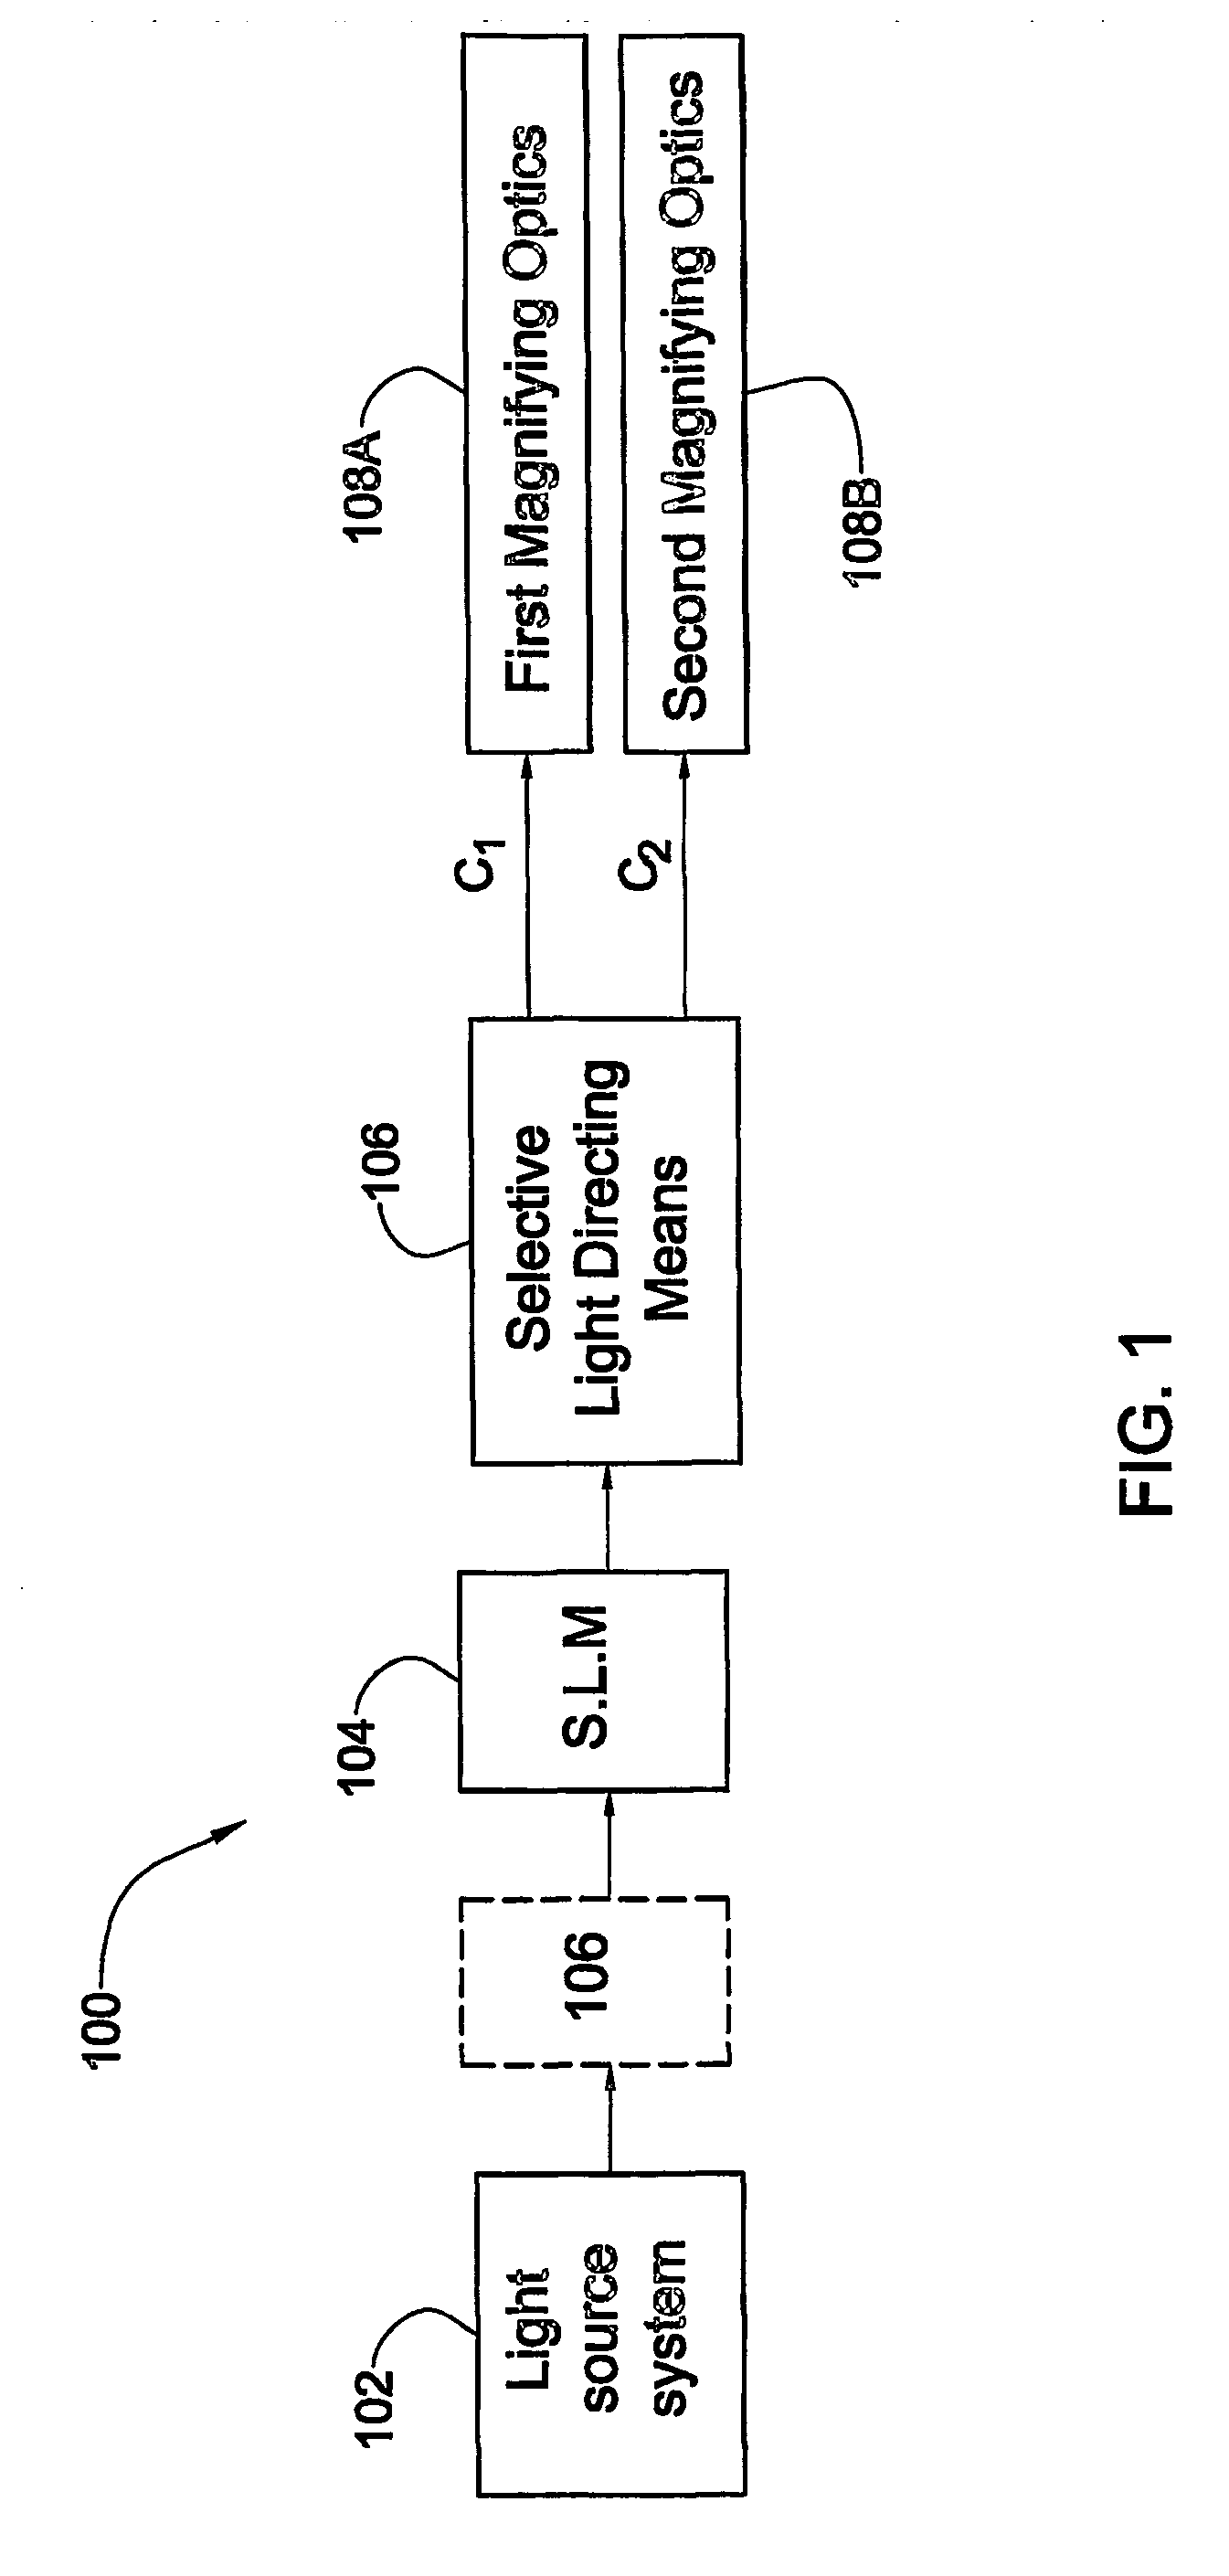 Projection system and method